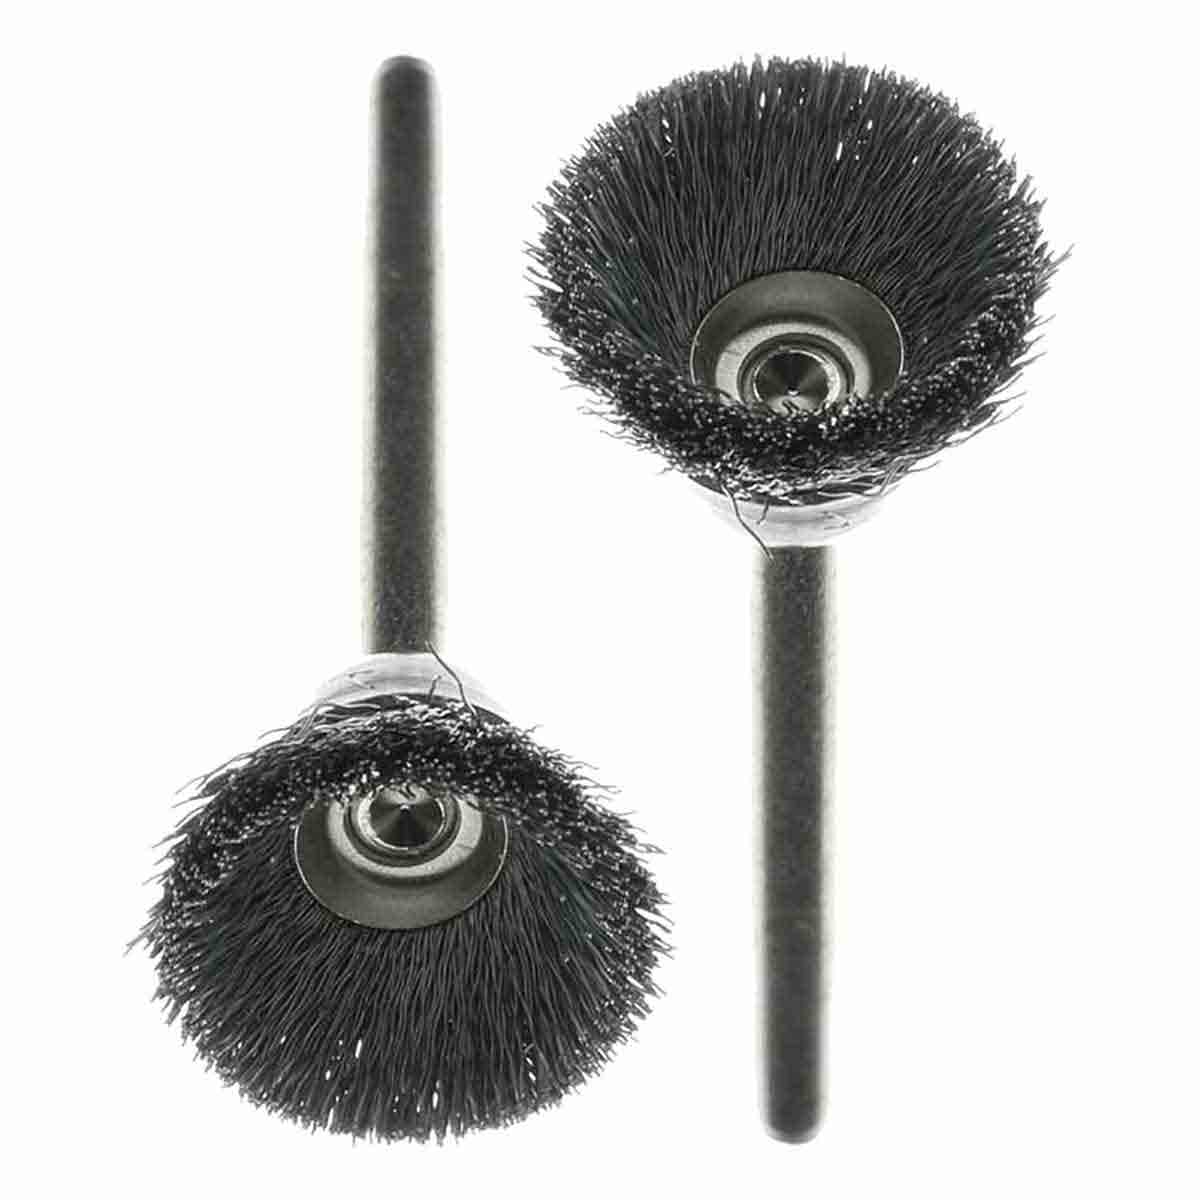 Carbon and Stainless Steel Cup Brushes